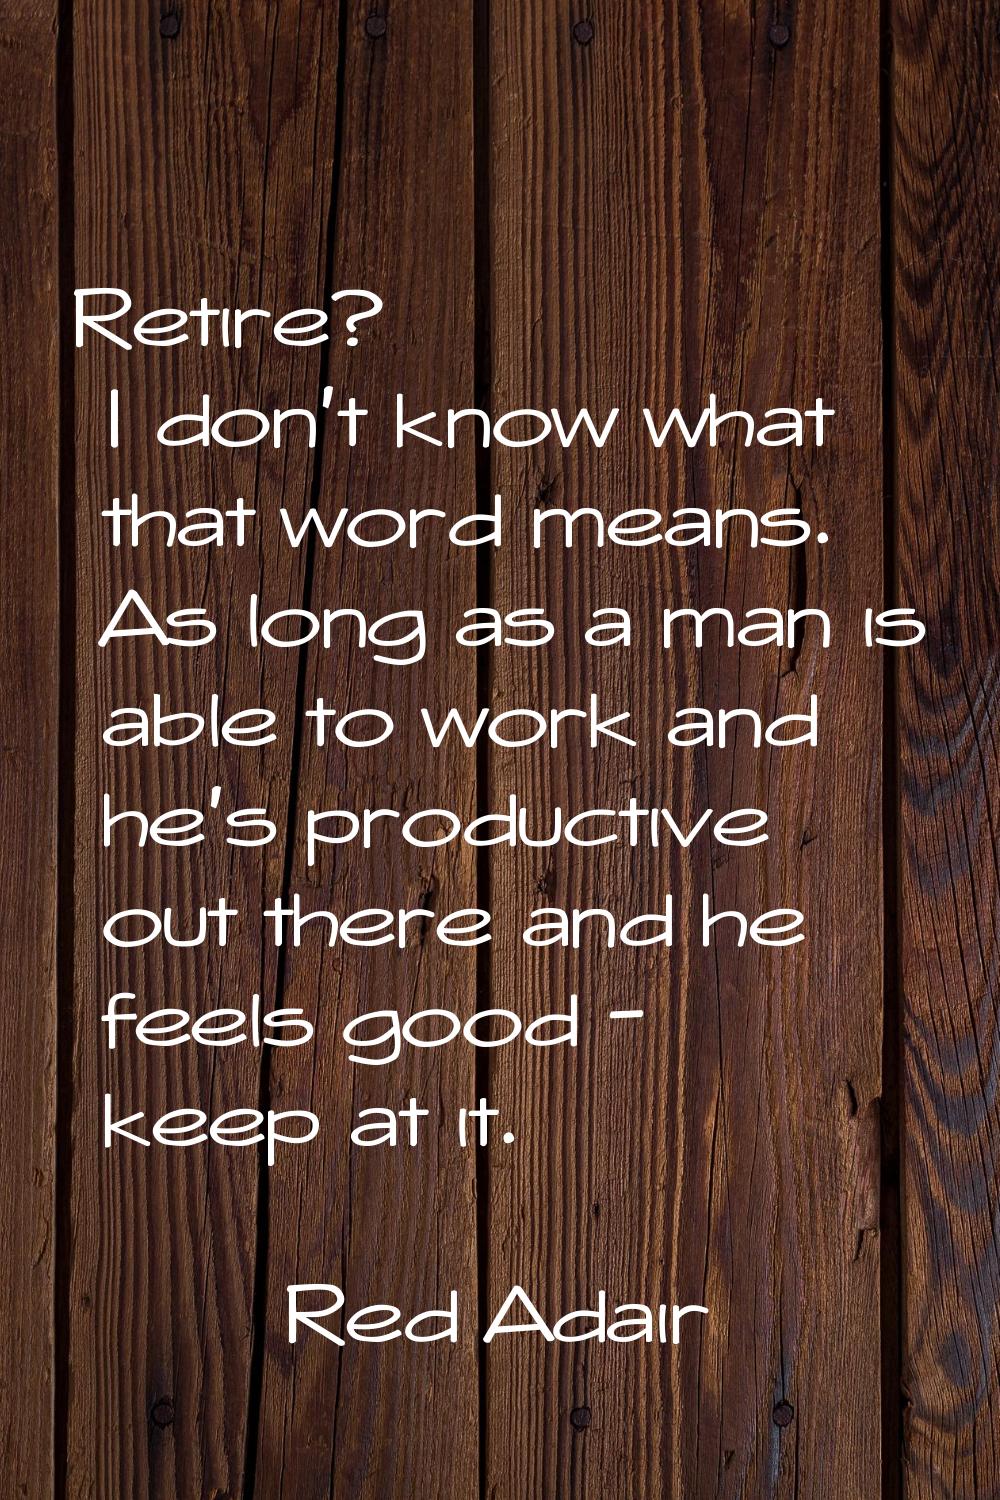 Retire? I don't know what that word means. As long as a man is able to work and he's productive out